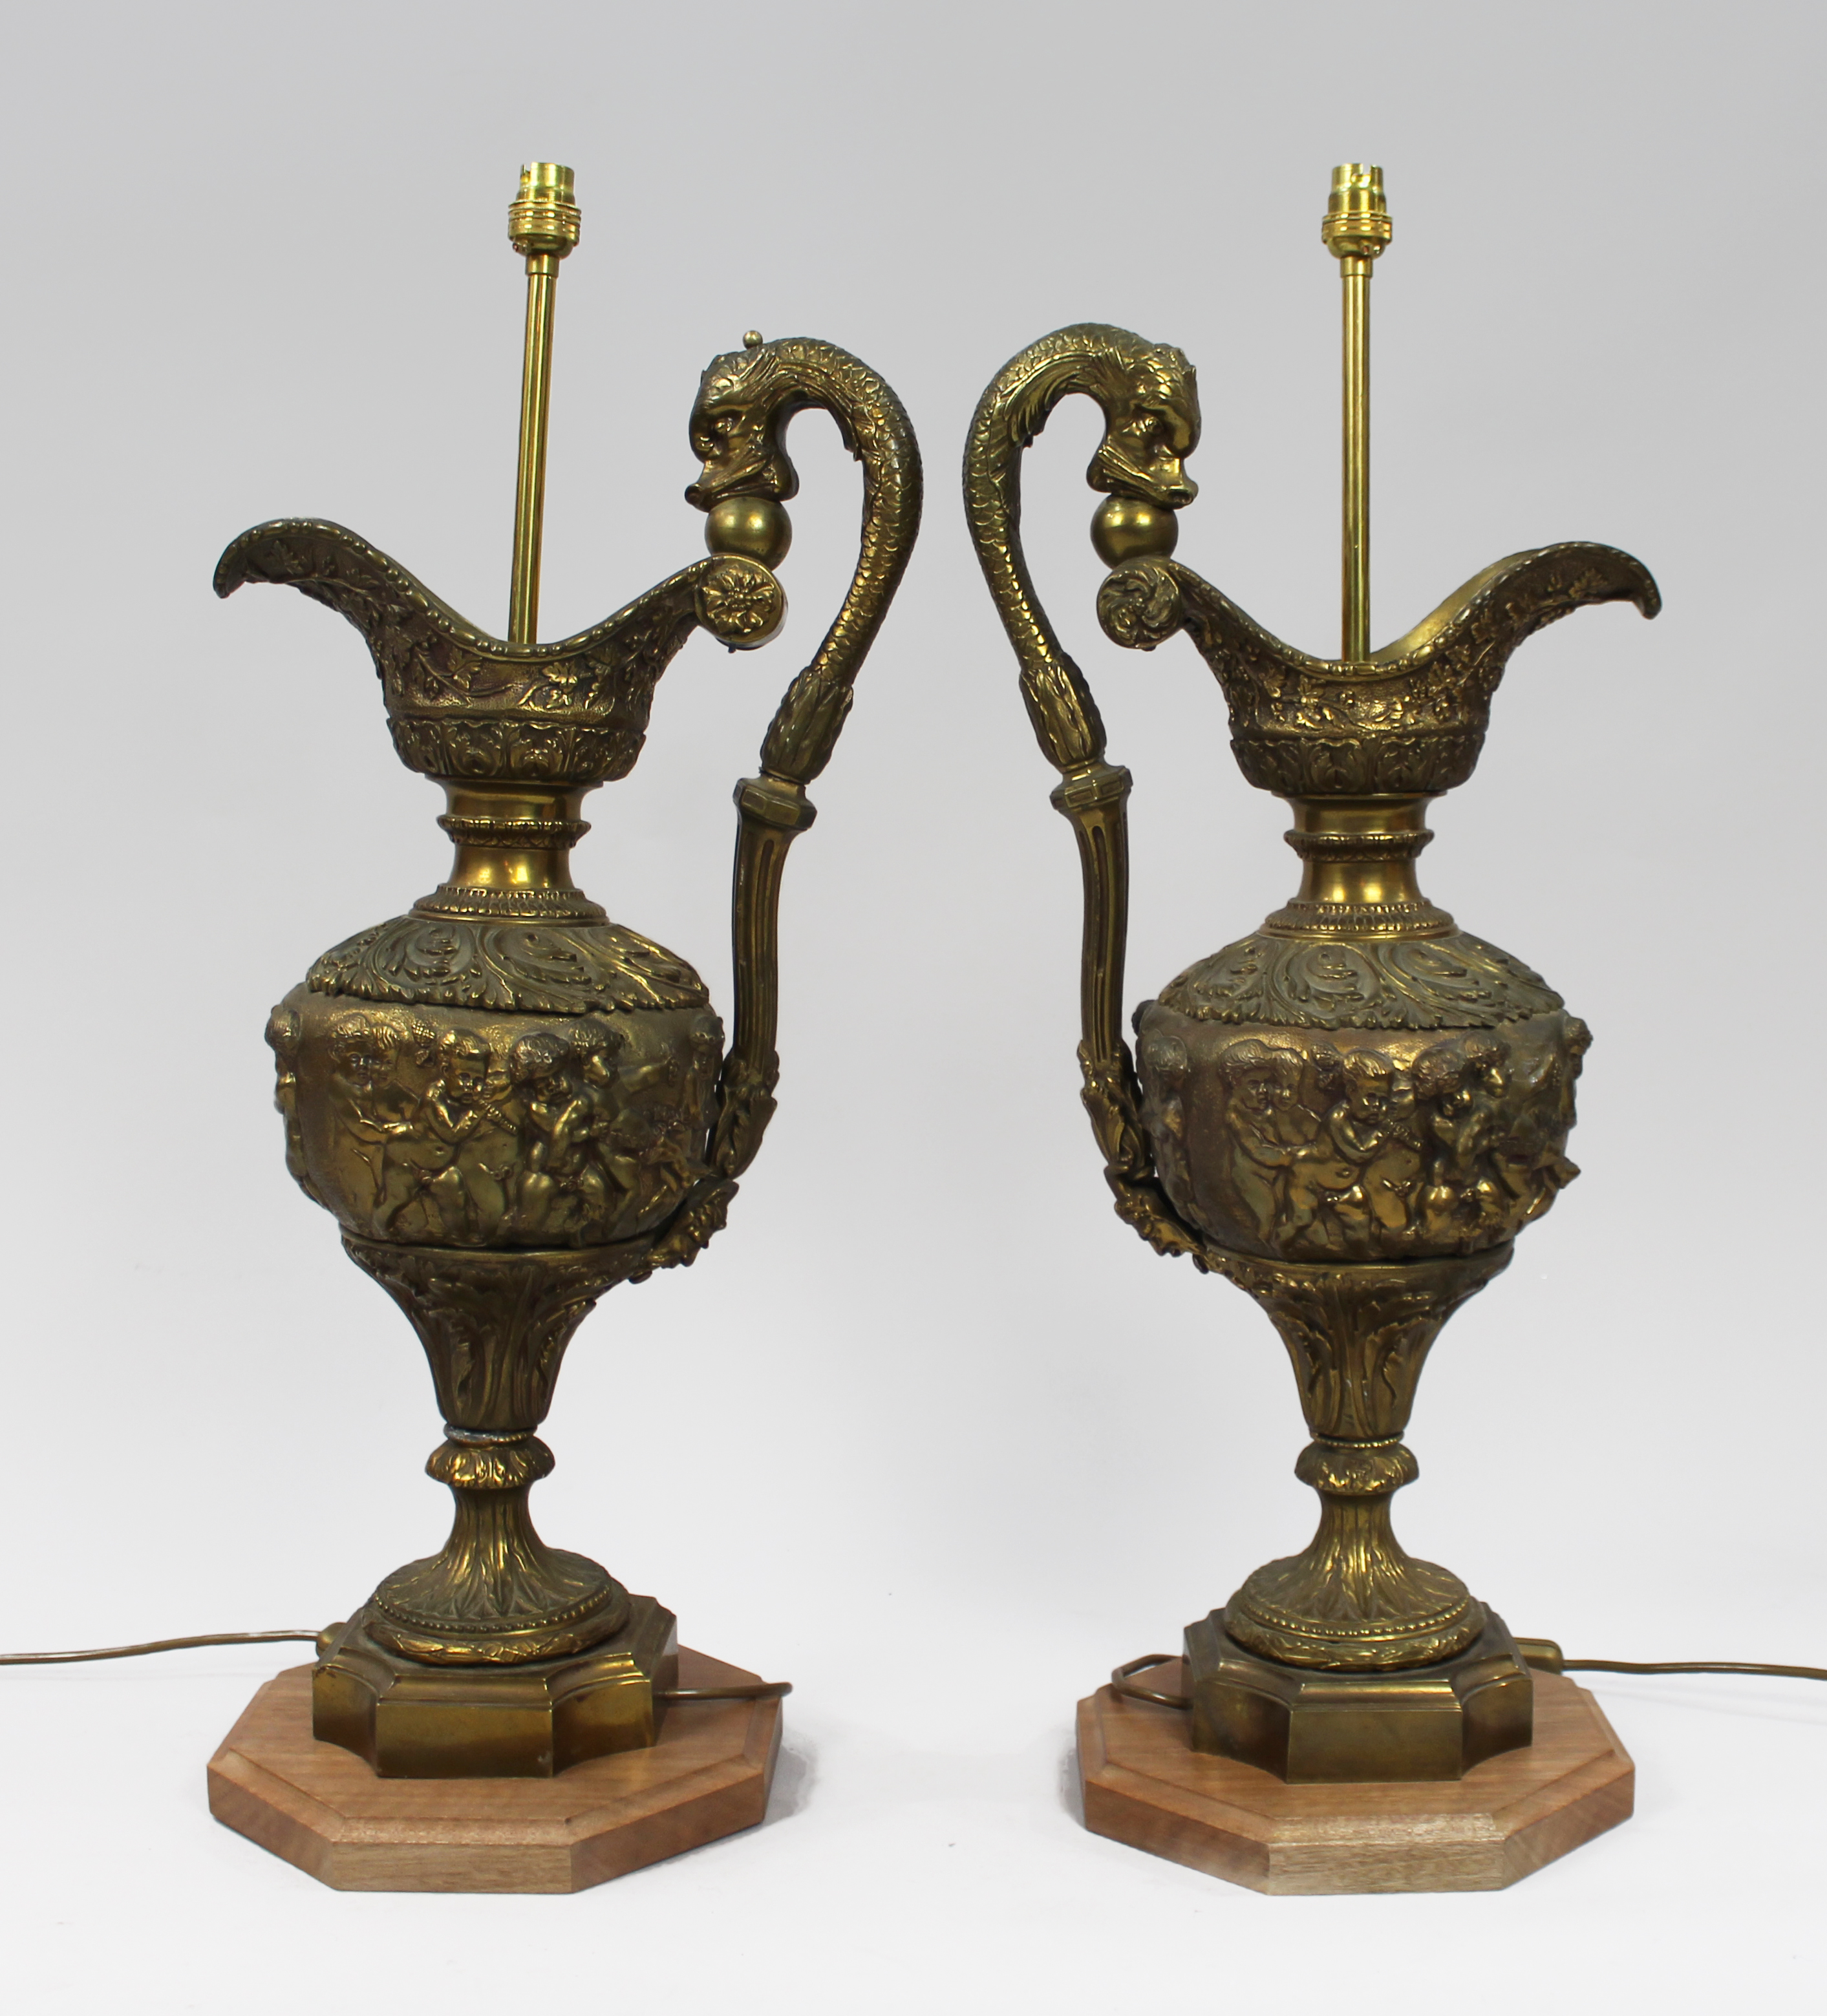 Pair of Large 19th c. Brass Ewer Table Lamps - Image 3 of 8